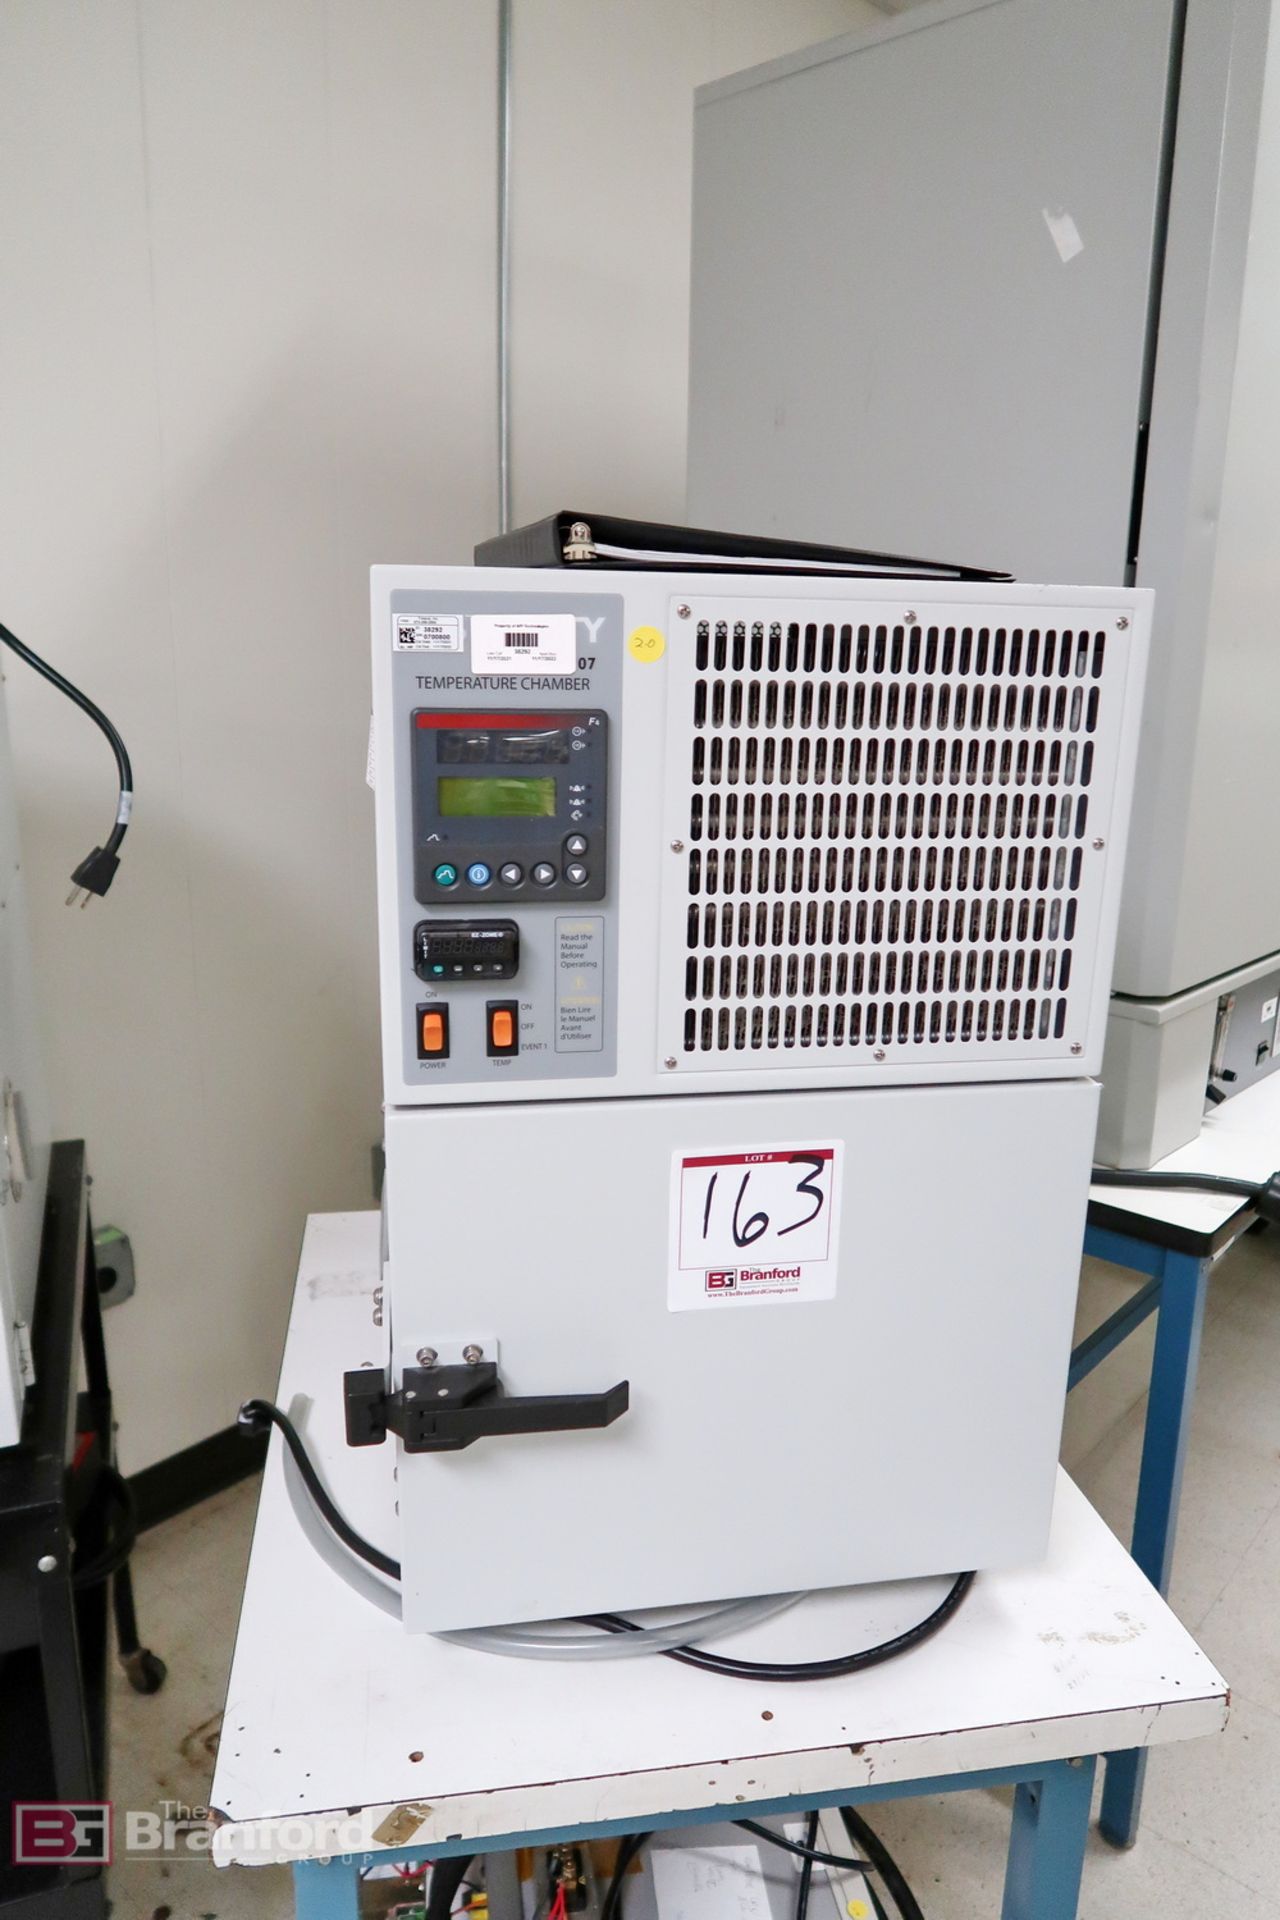 Test Equity 107 test chamber